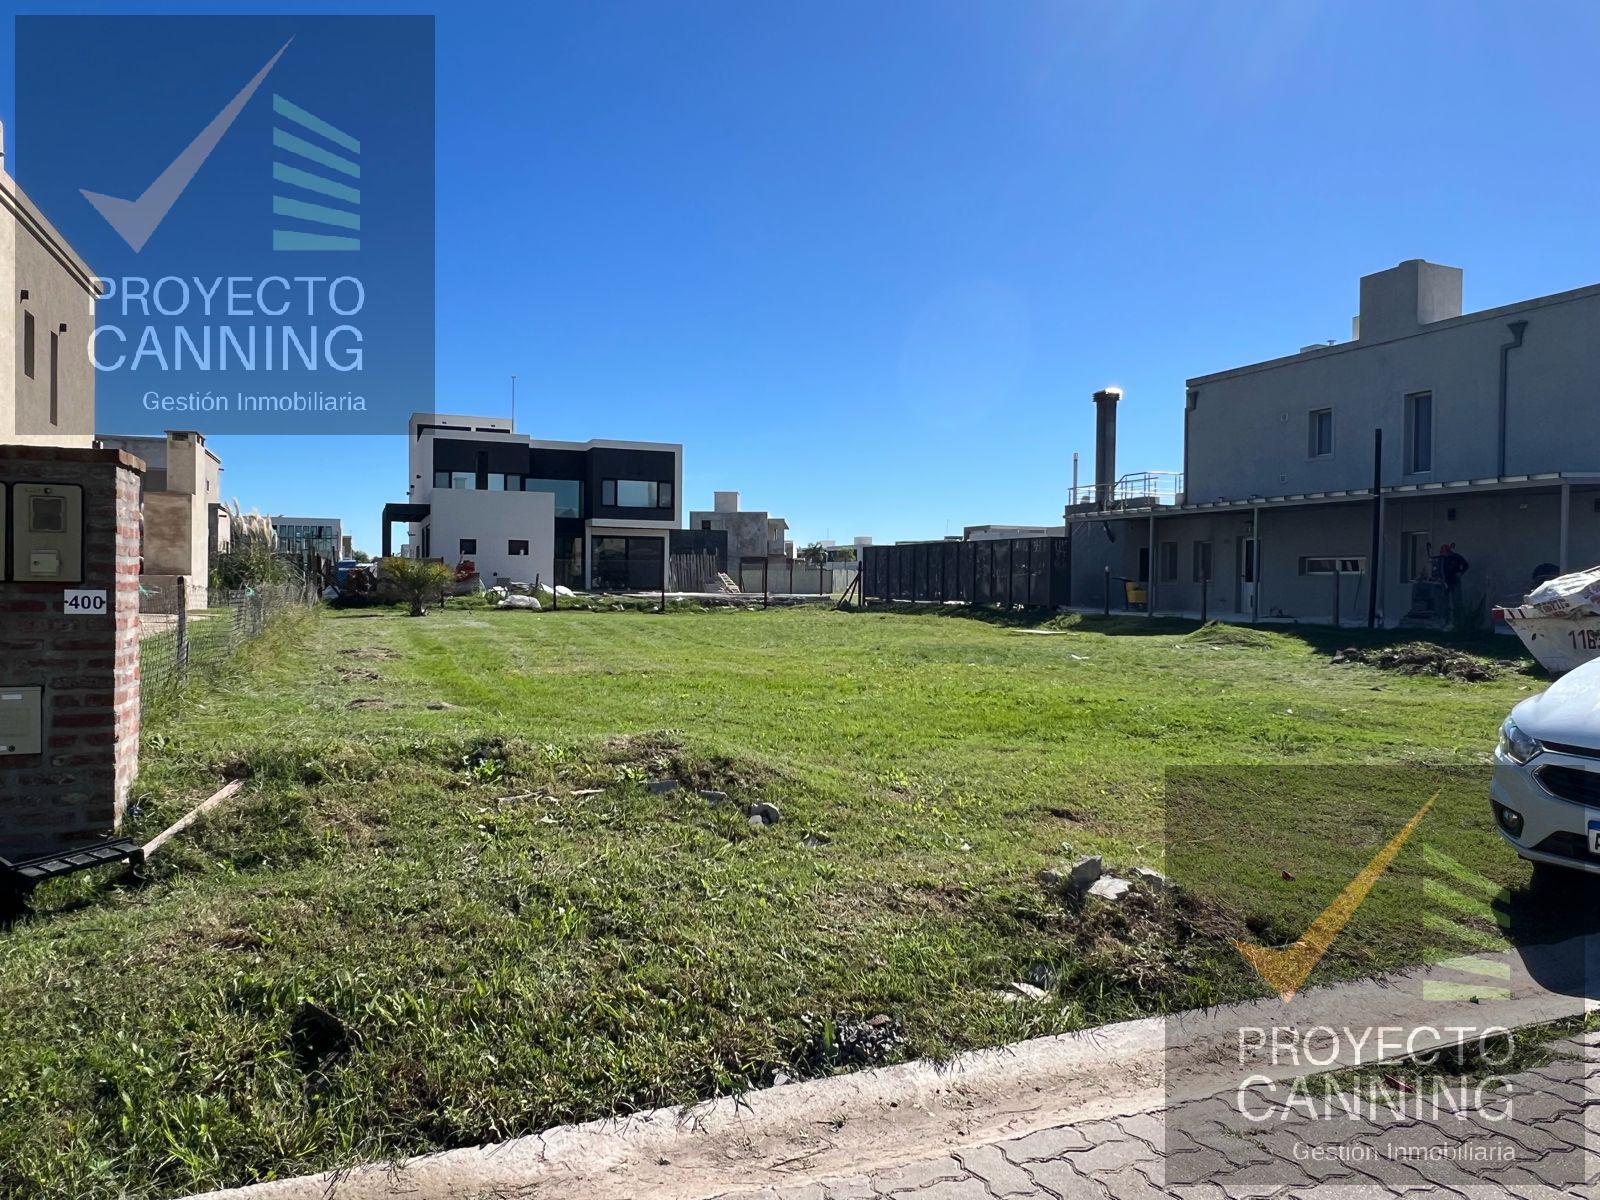 #5047916 | Venta | Lote | Canning (Proyecto Canning)